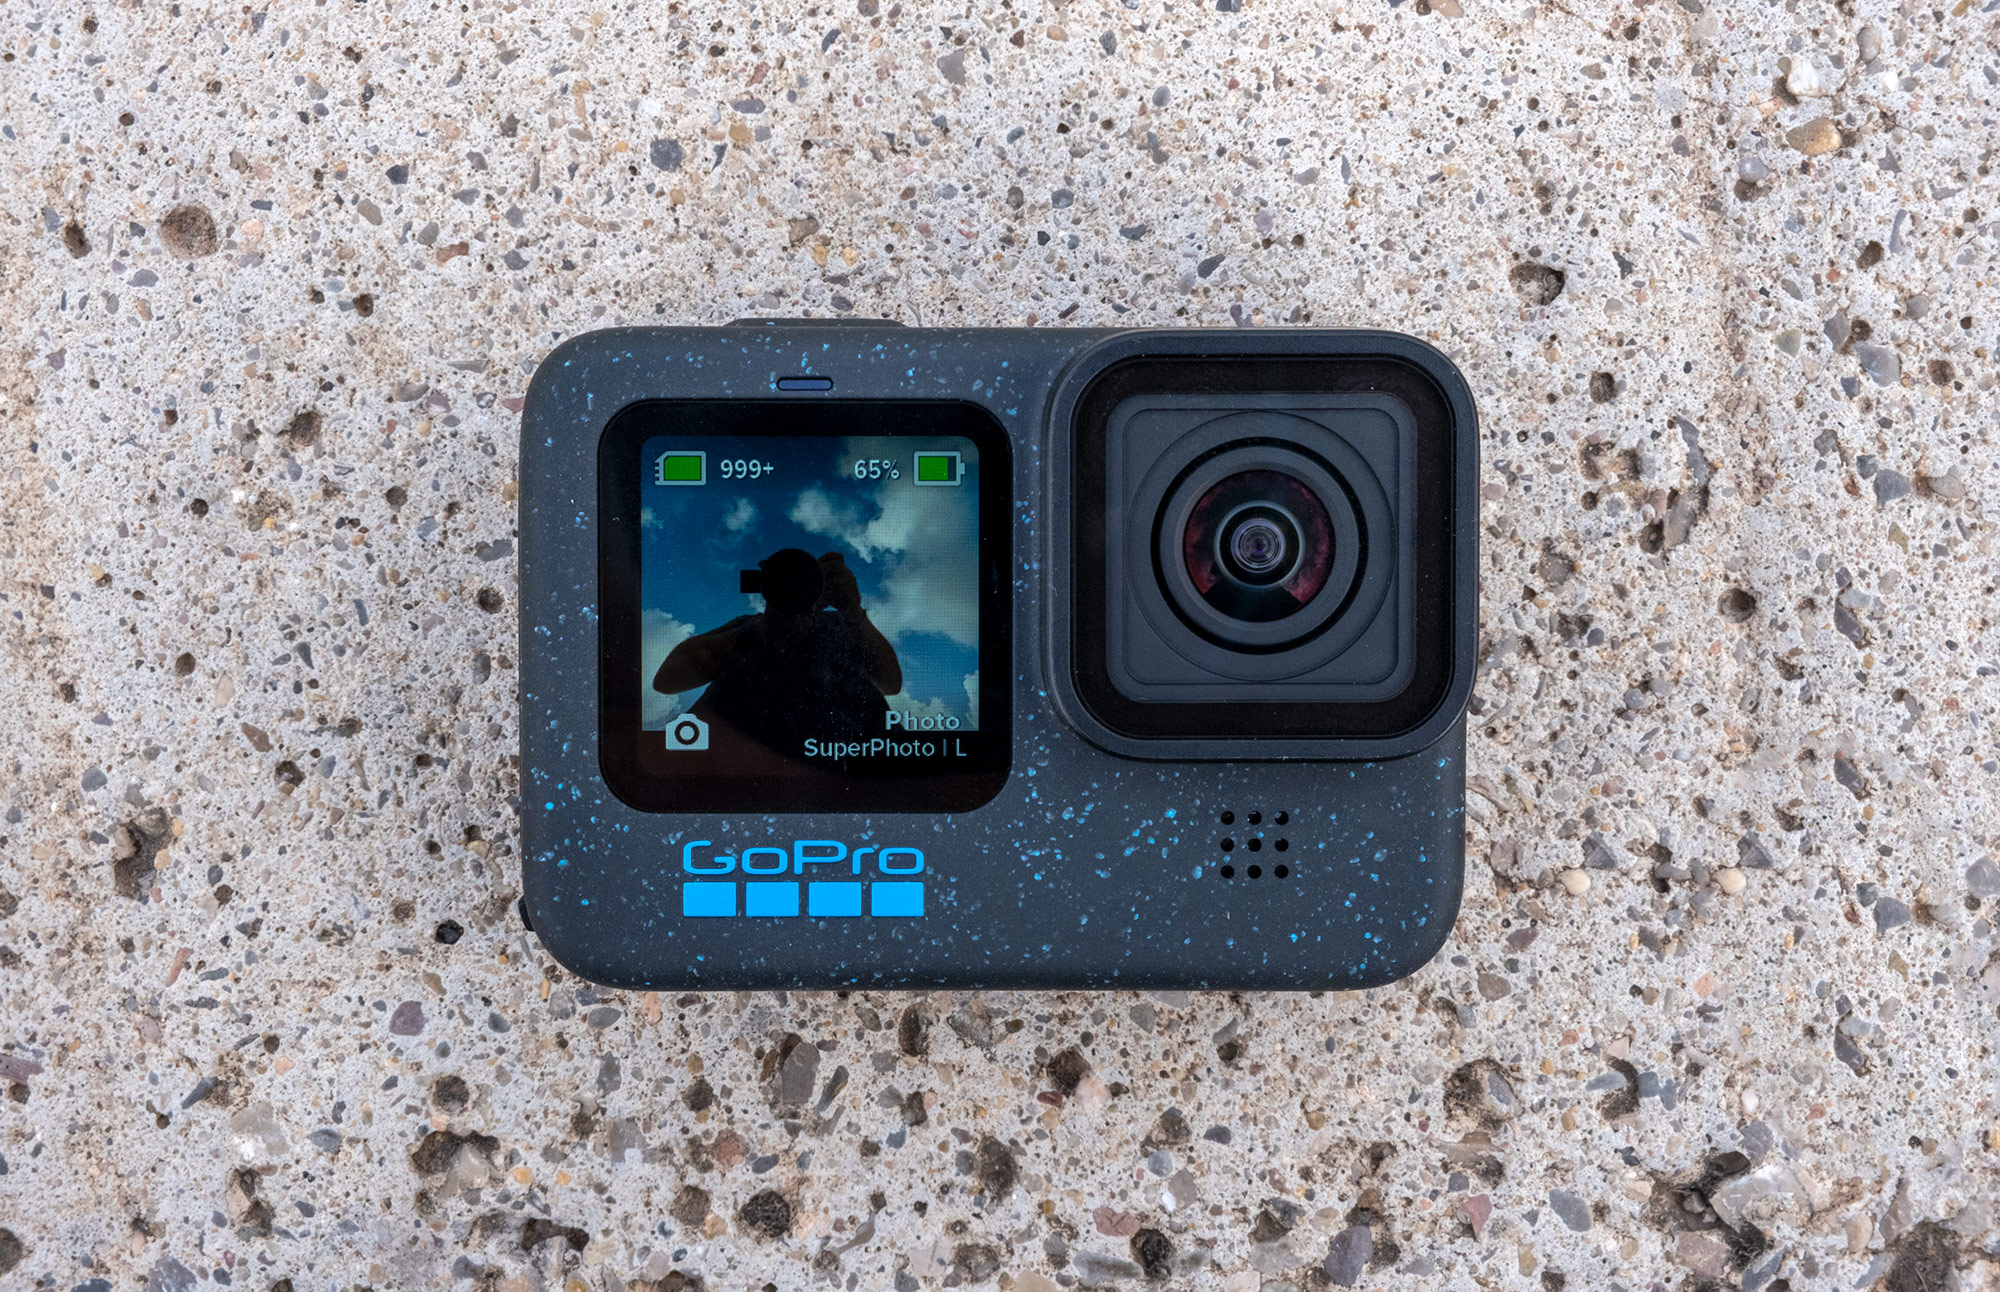 The new GoPro Hero 12 Black is pictured while placed on pavement.